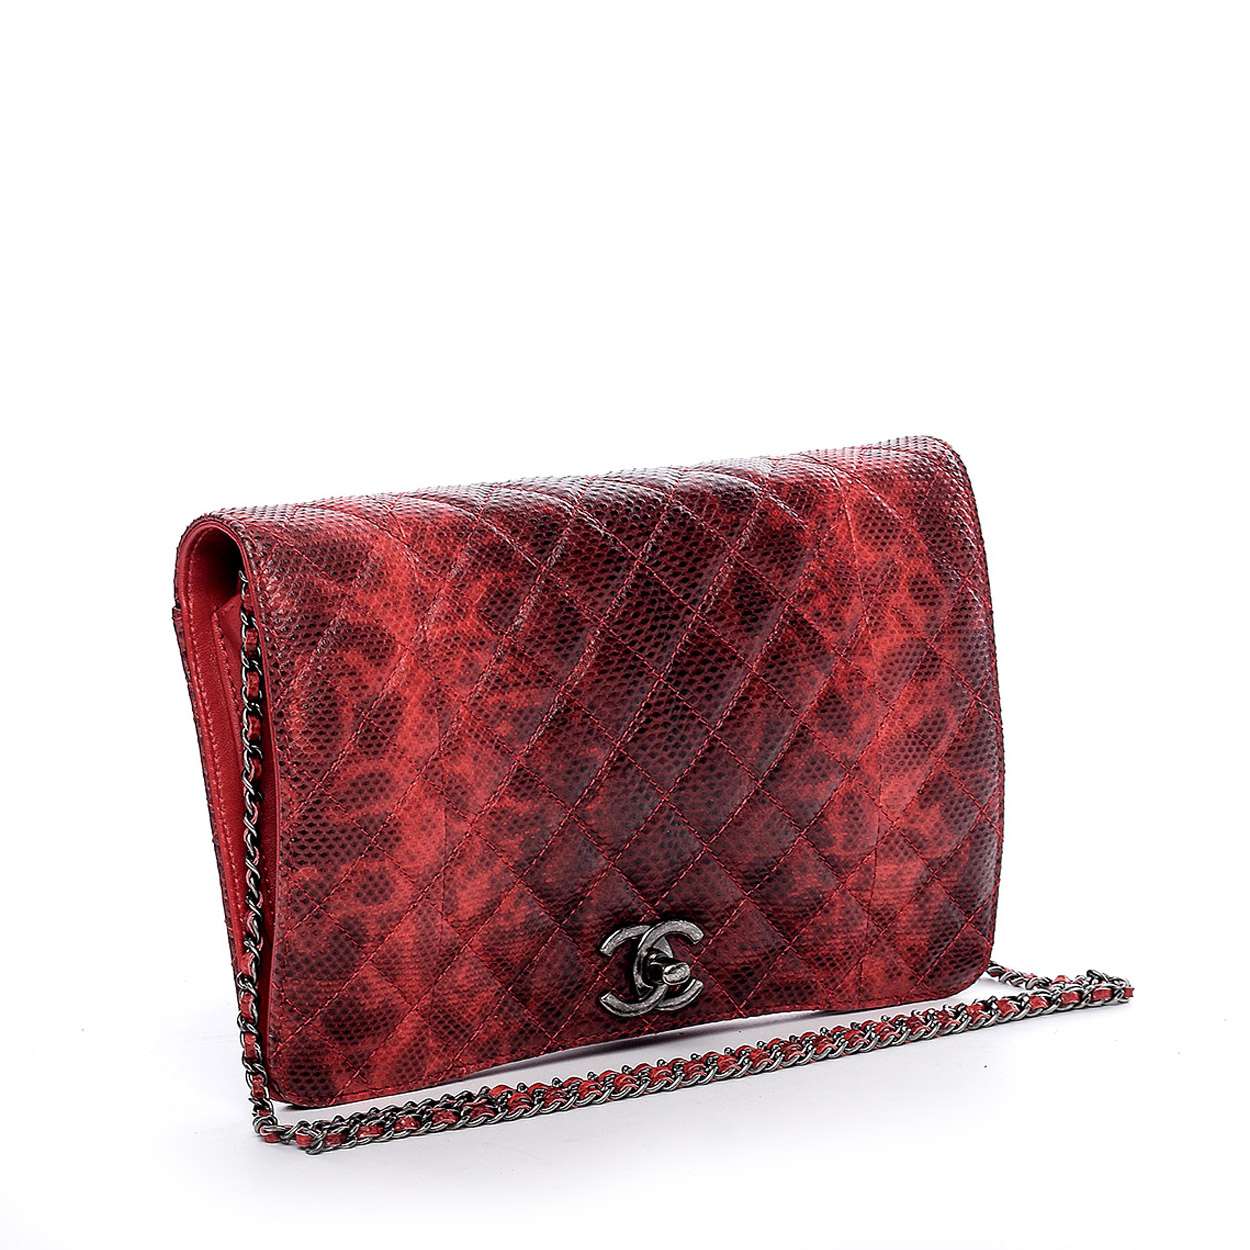 Chanel - Red Quilted Lizard Leather Messenger and Clutch Bag